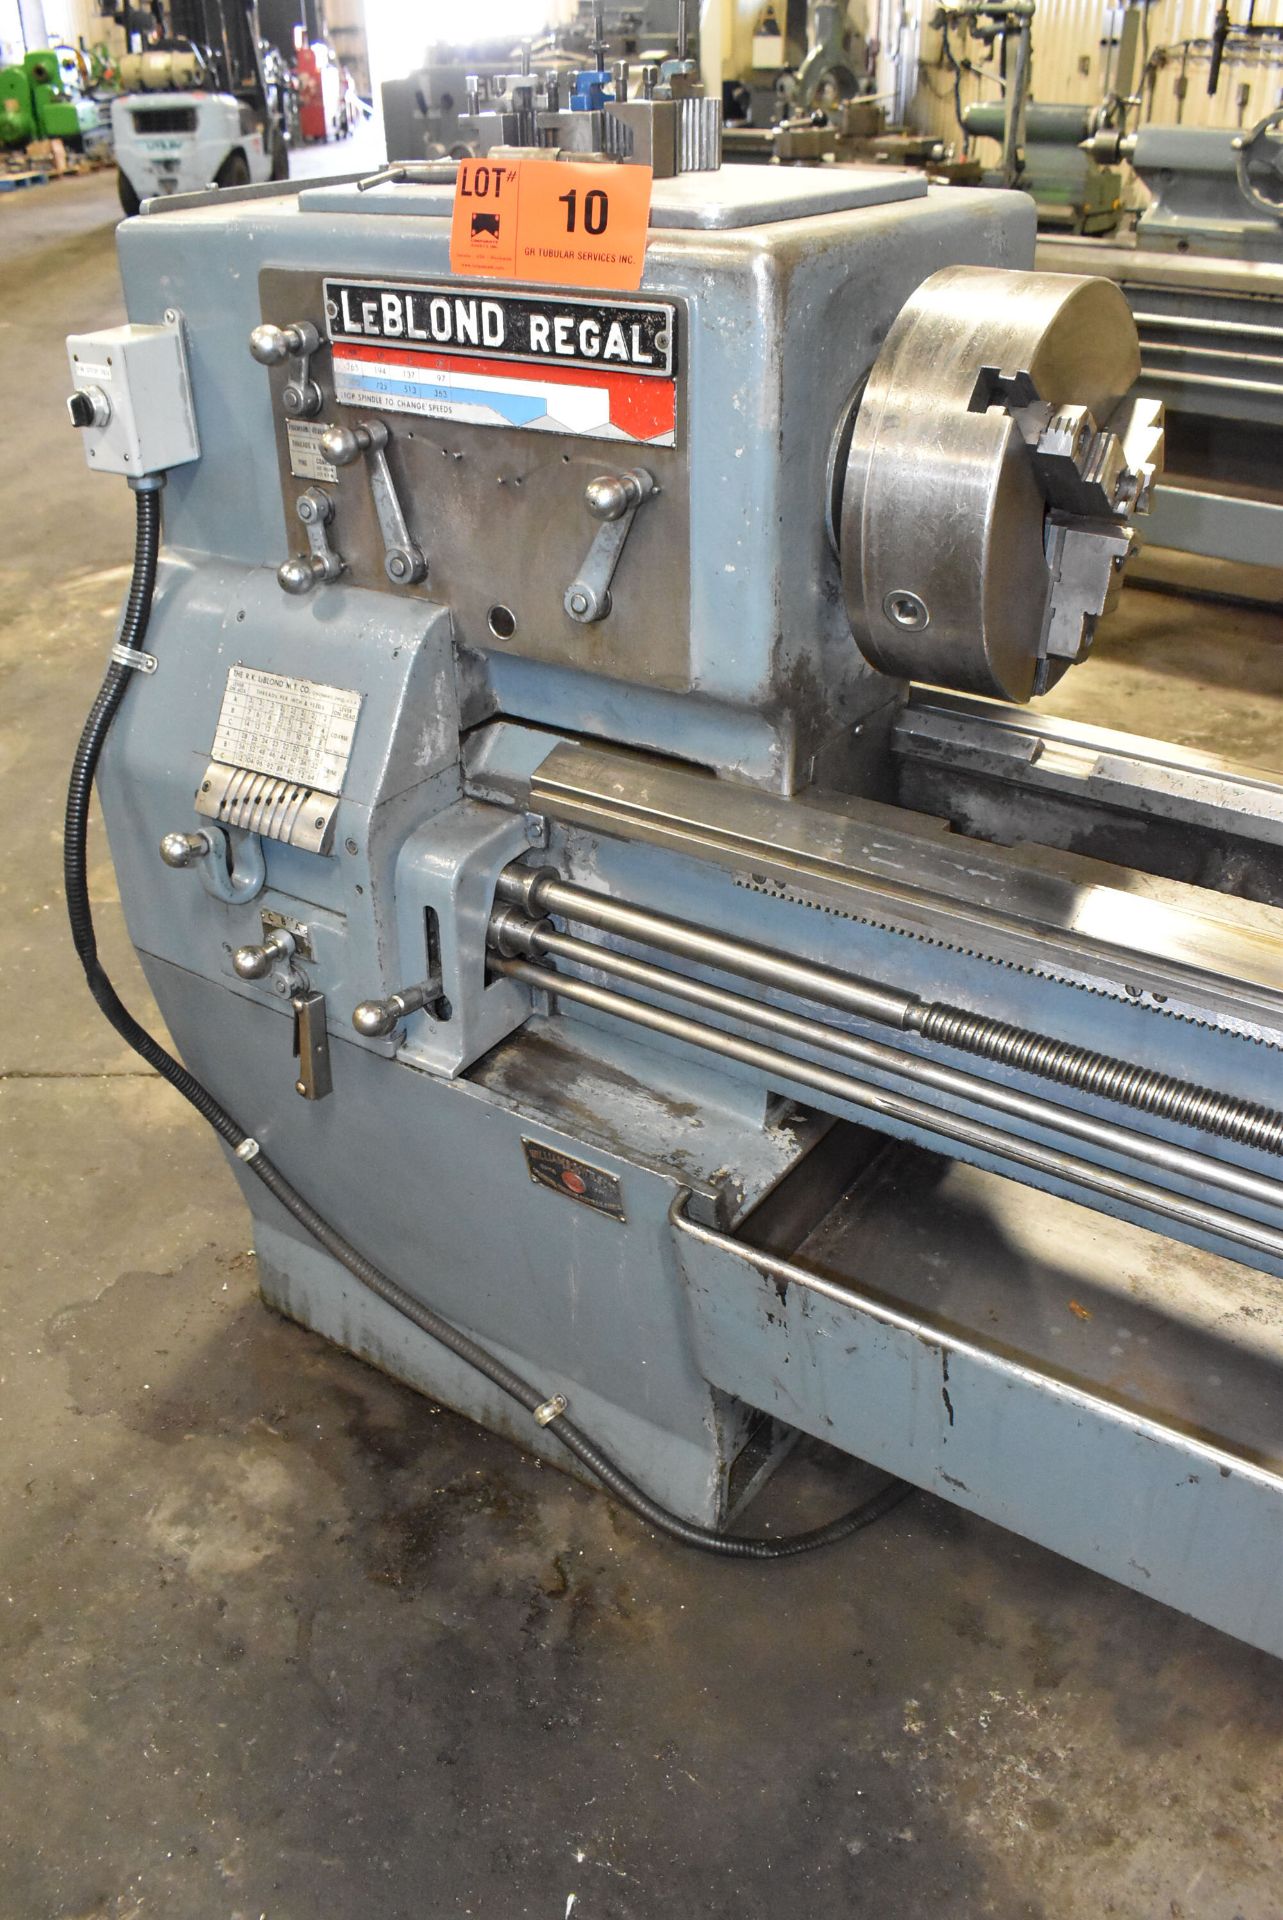 WILLIAM & WILSON LEBLOND REGAL LATHE WITH 22" SWING OVER BED, 67.5" BETWEEN CENTERS, 1.25" BORE, - Image 3 of 10